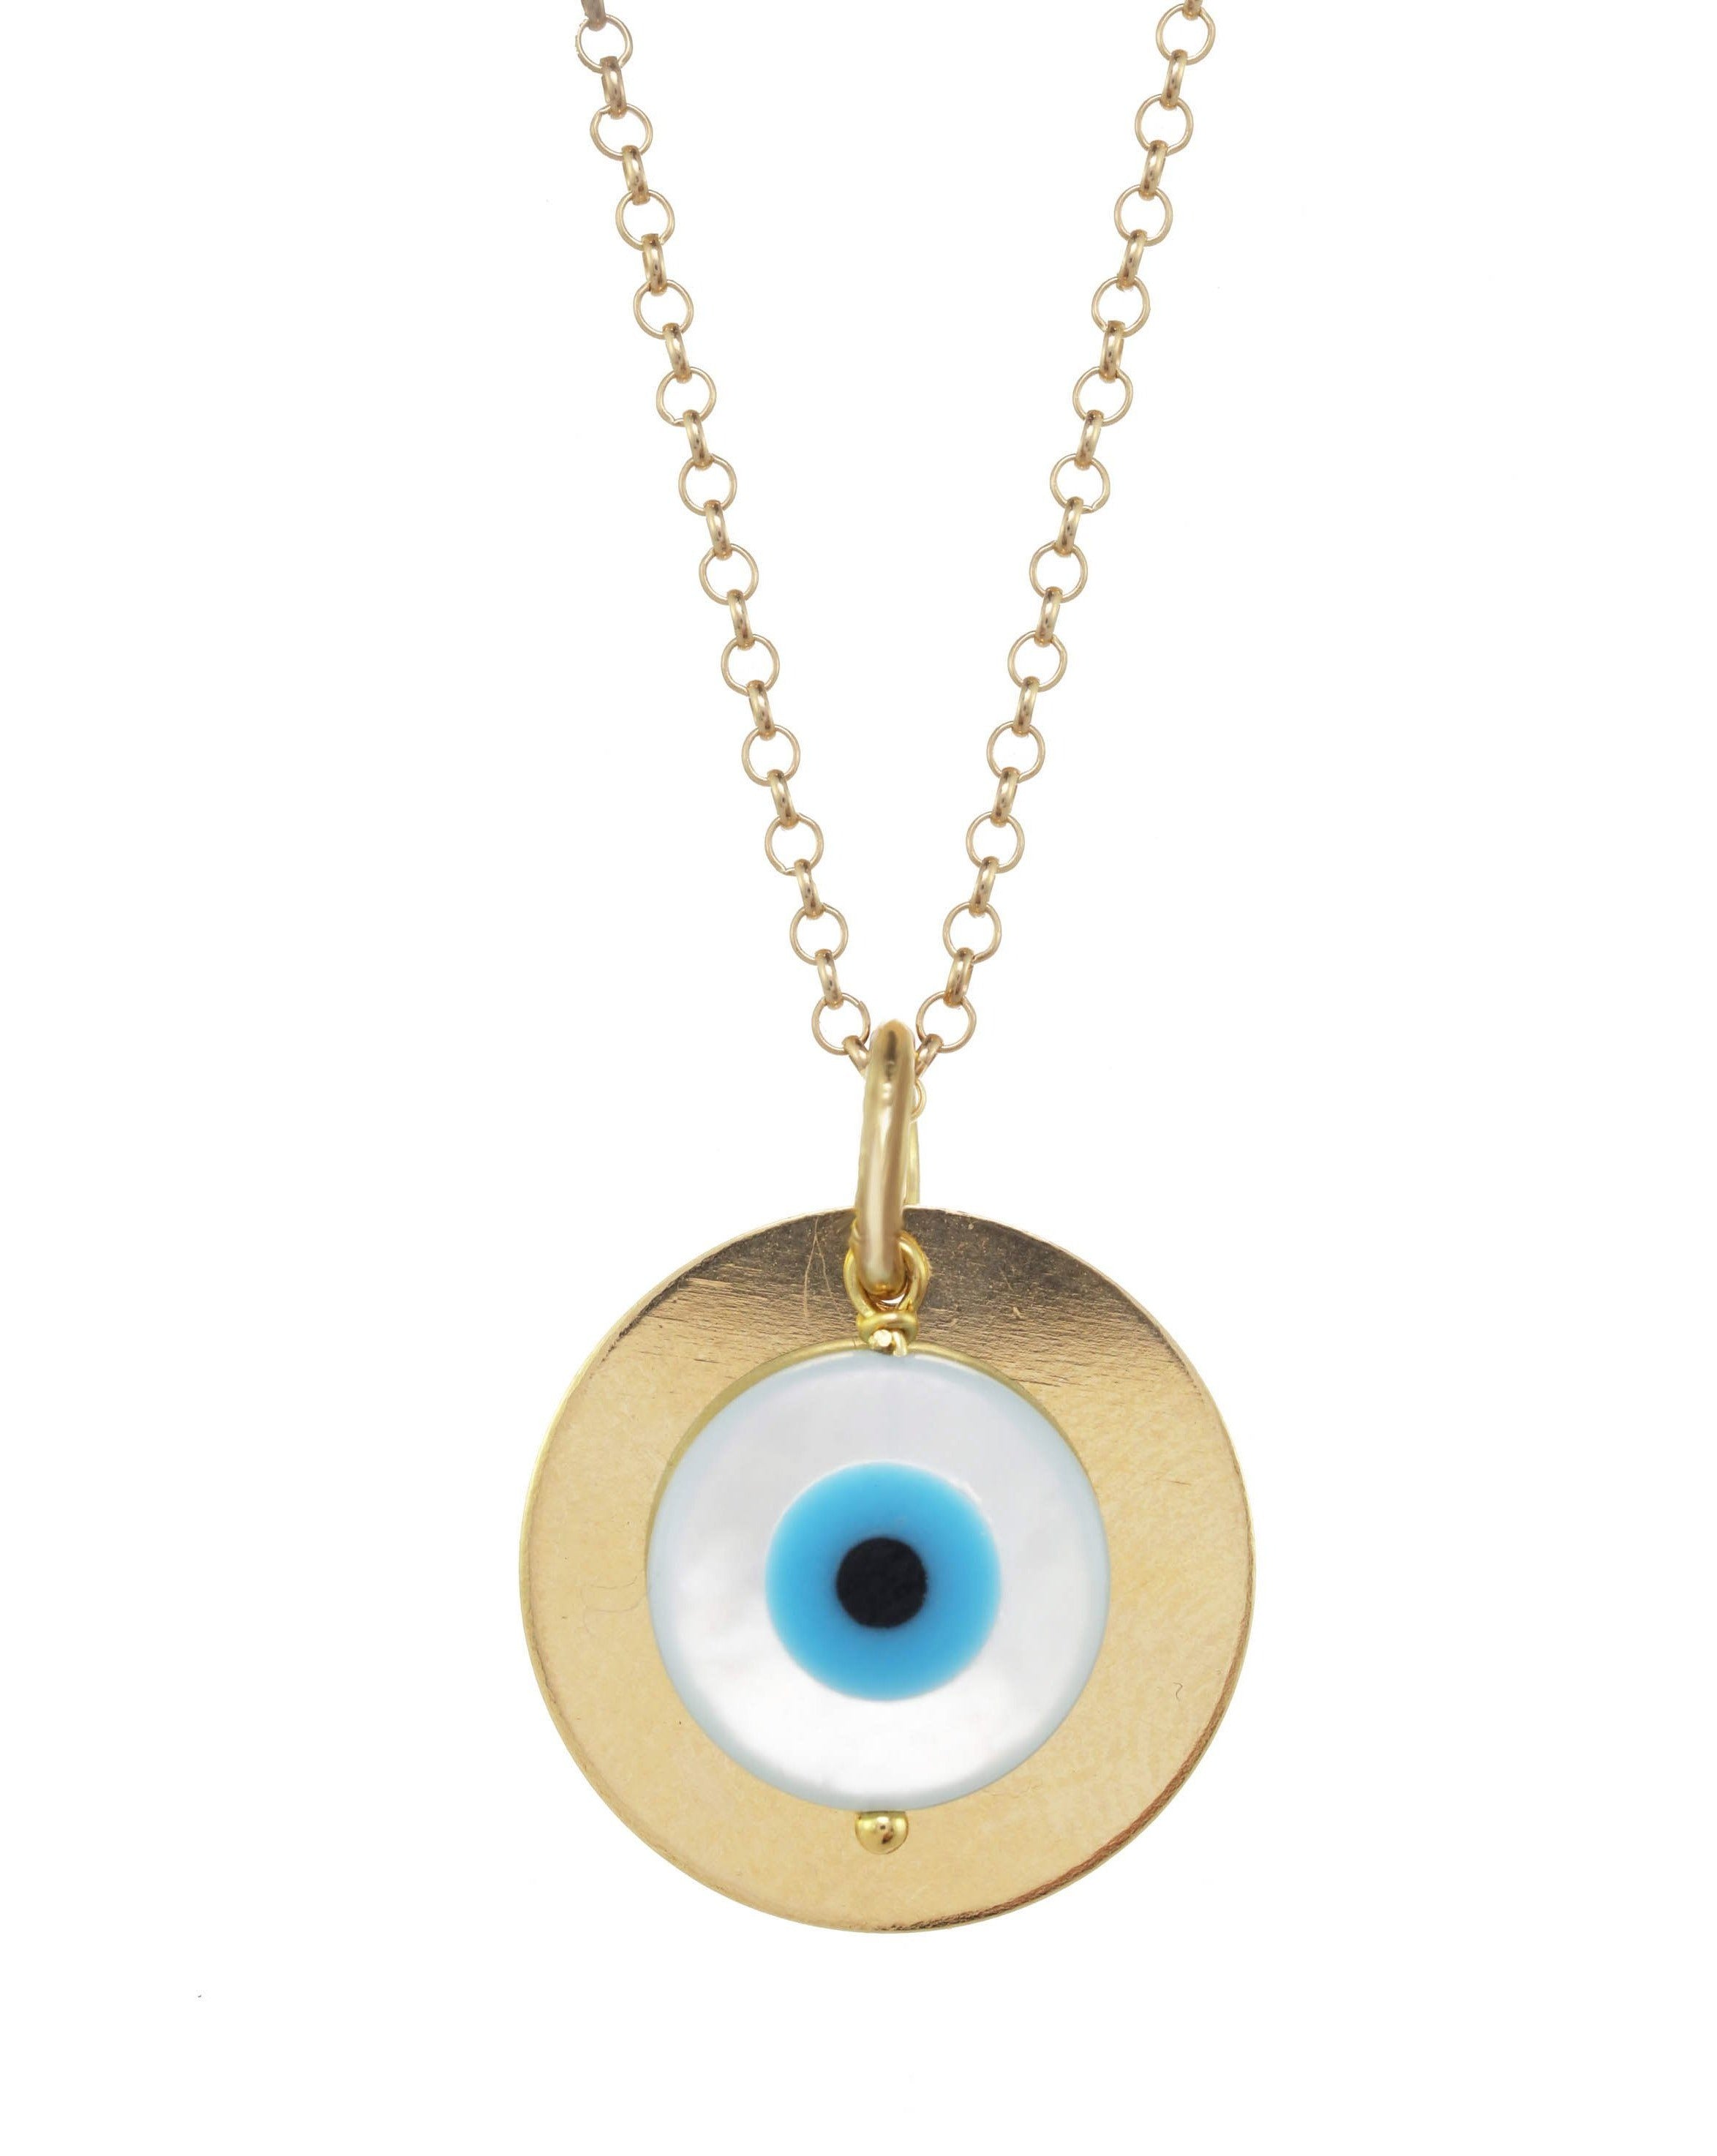 Iza Necklace by KOZAKH. An 18 to 20 inch adjustable length, 1mm thick Rollo chain necklace in 14k Gold Filled, featuring a 16mm Flat Coin and a 7mm hand carved Mother of Pearl evil eye charm.